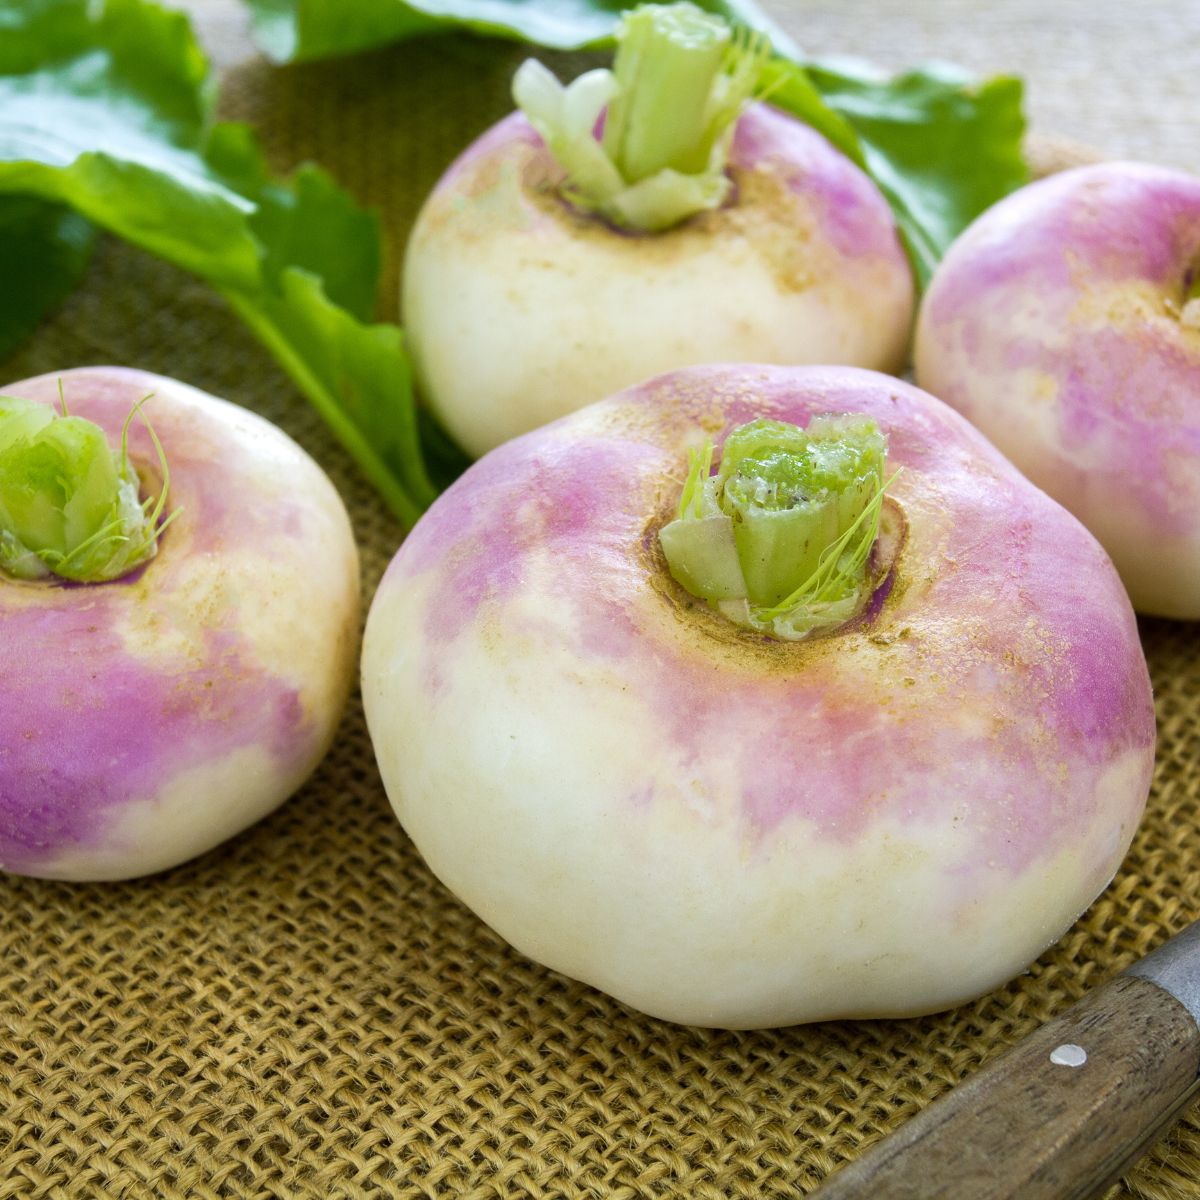 Four purple turnips on a table.